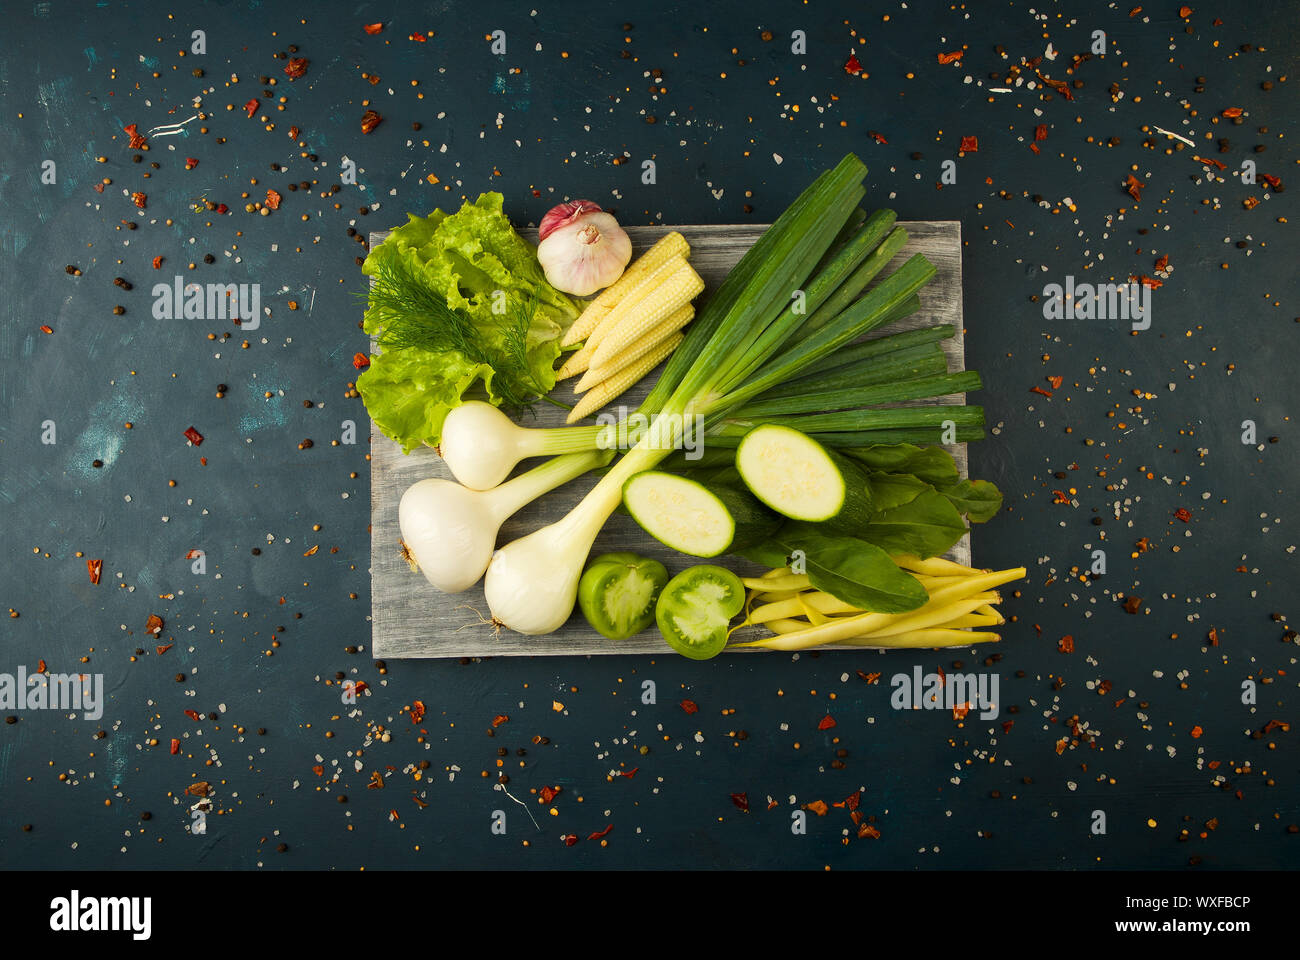 ONIONS GARLIC ON THE BOARD. GREEN ONIONS FEATHERS WITH THE HEADS OF GARLIC LYING ON A WOODEN BOARD ON A TEXTURED BACKGROUND. Stock Photo